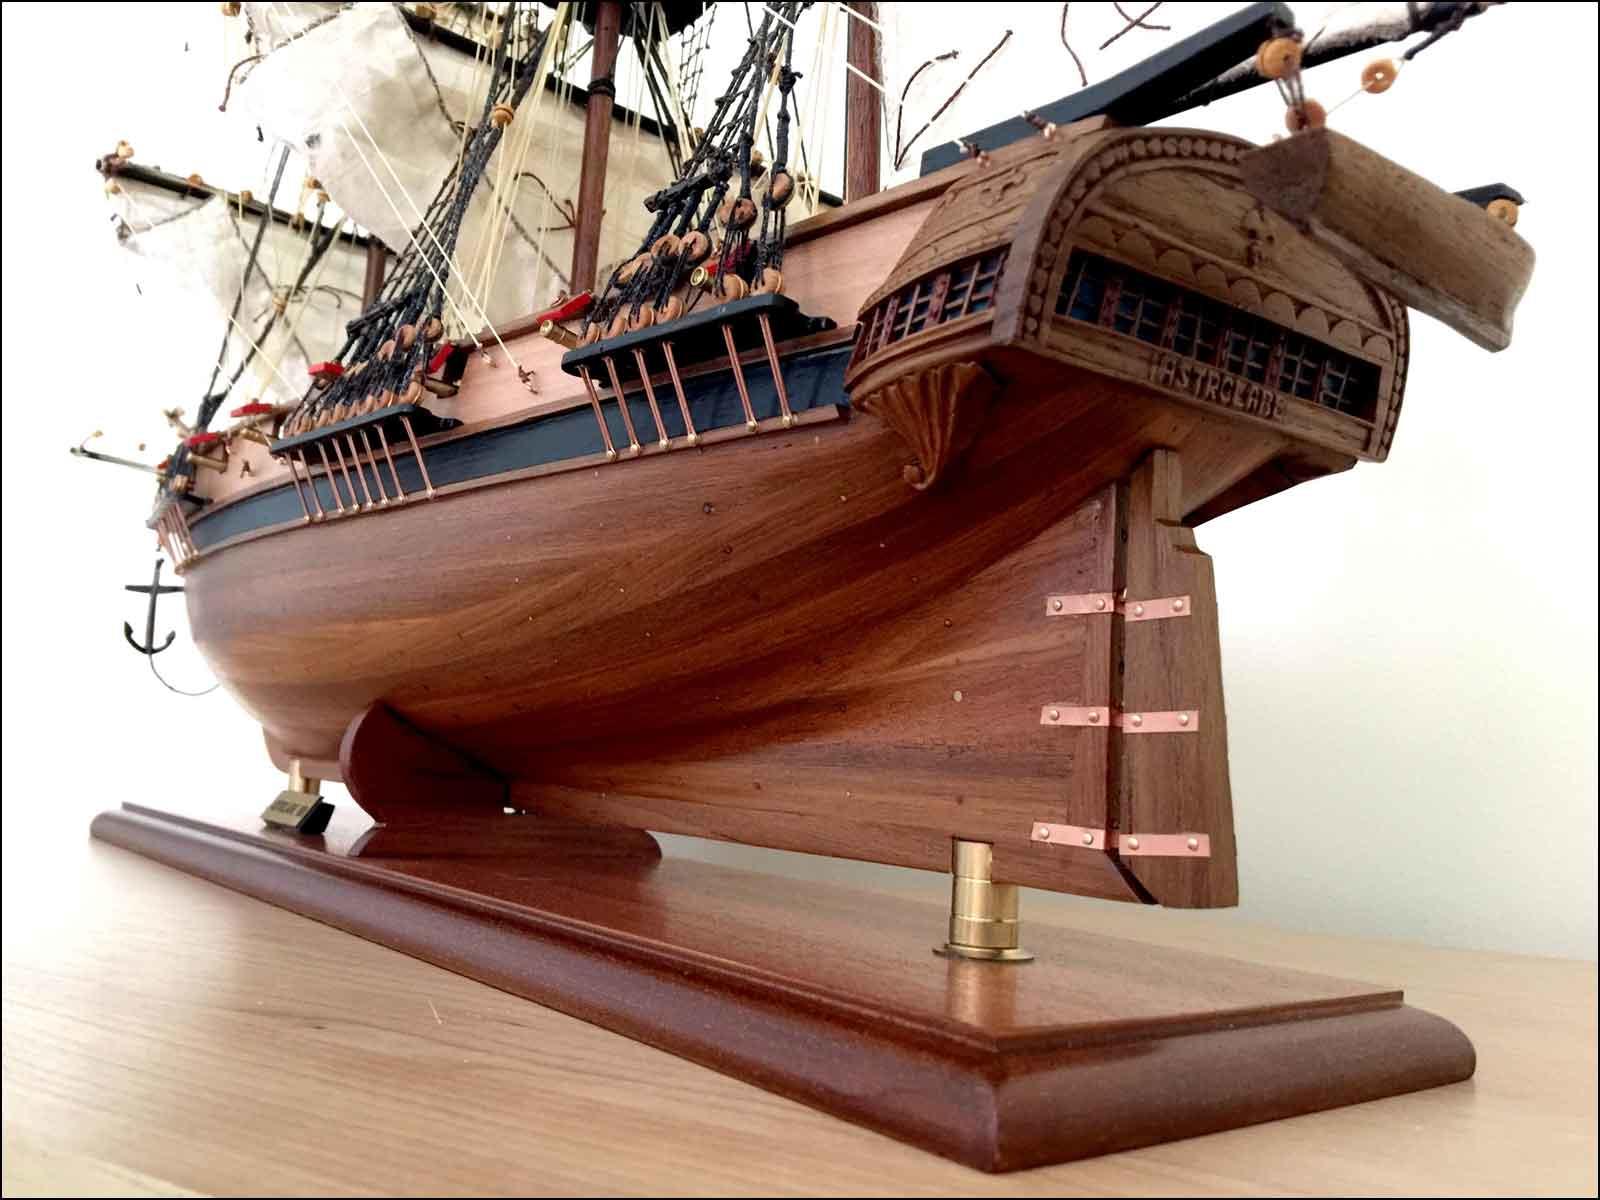 completed wooden model ship of Astrolabe